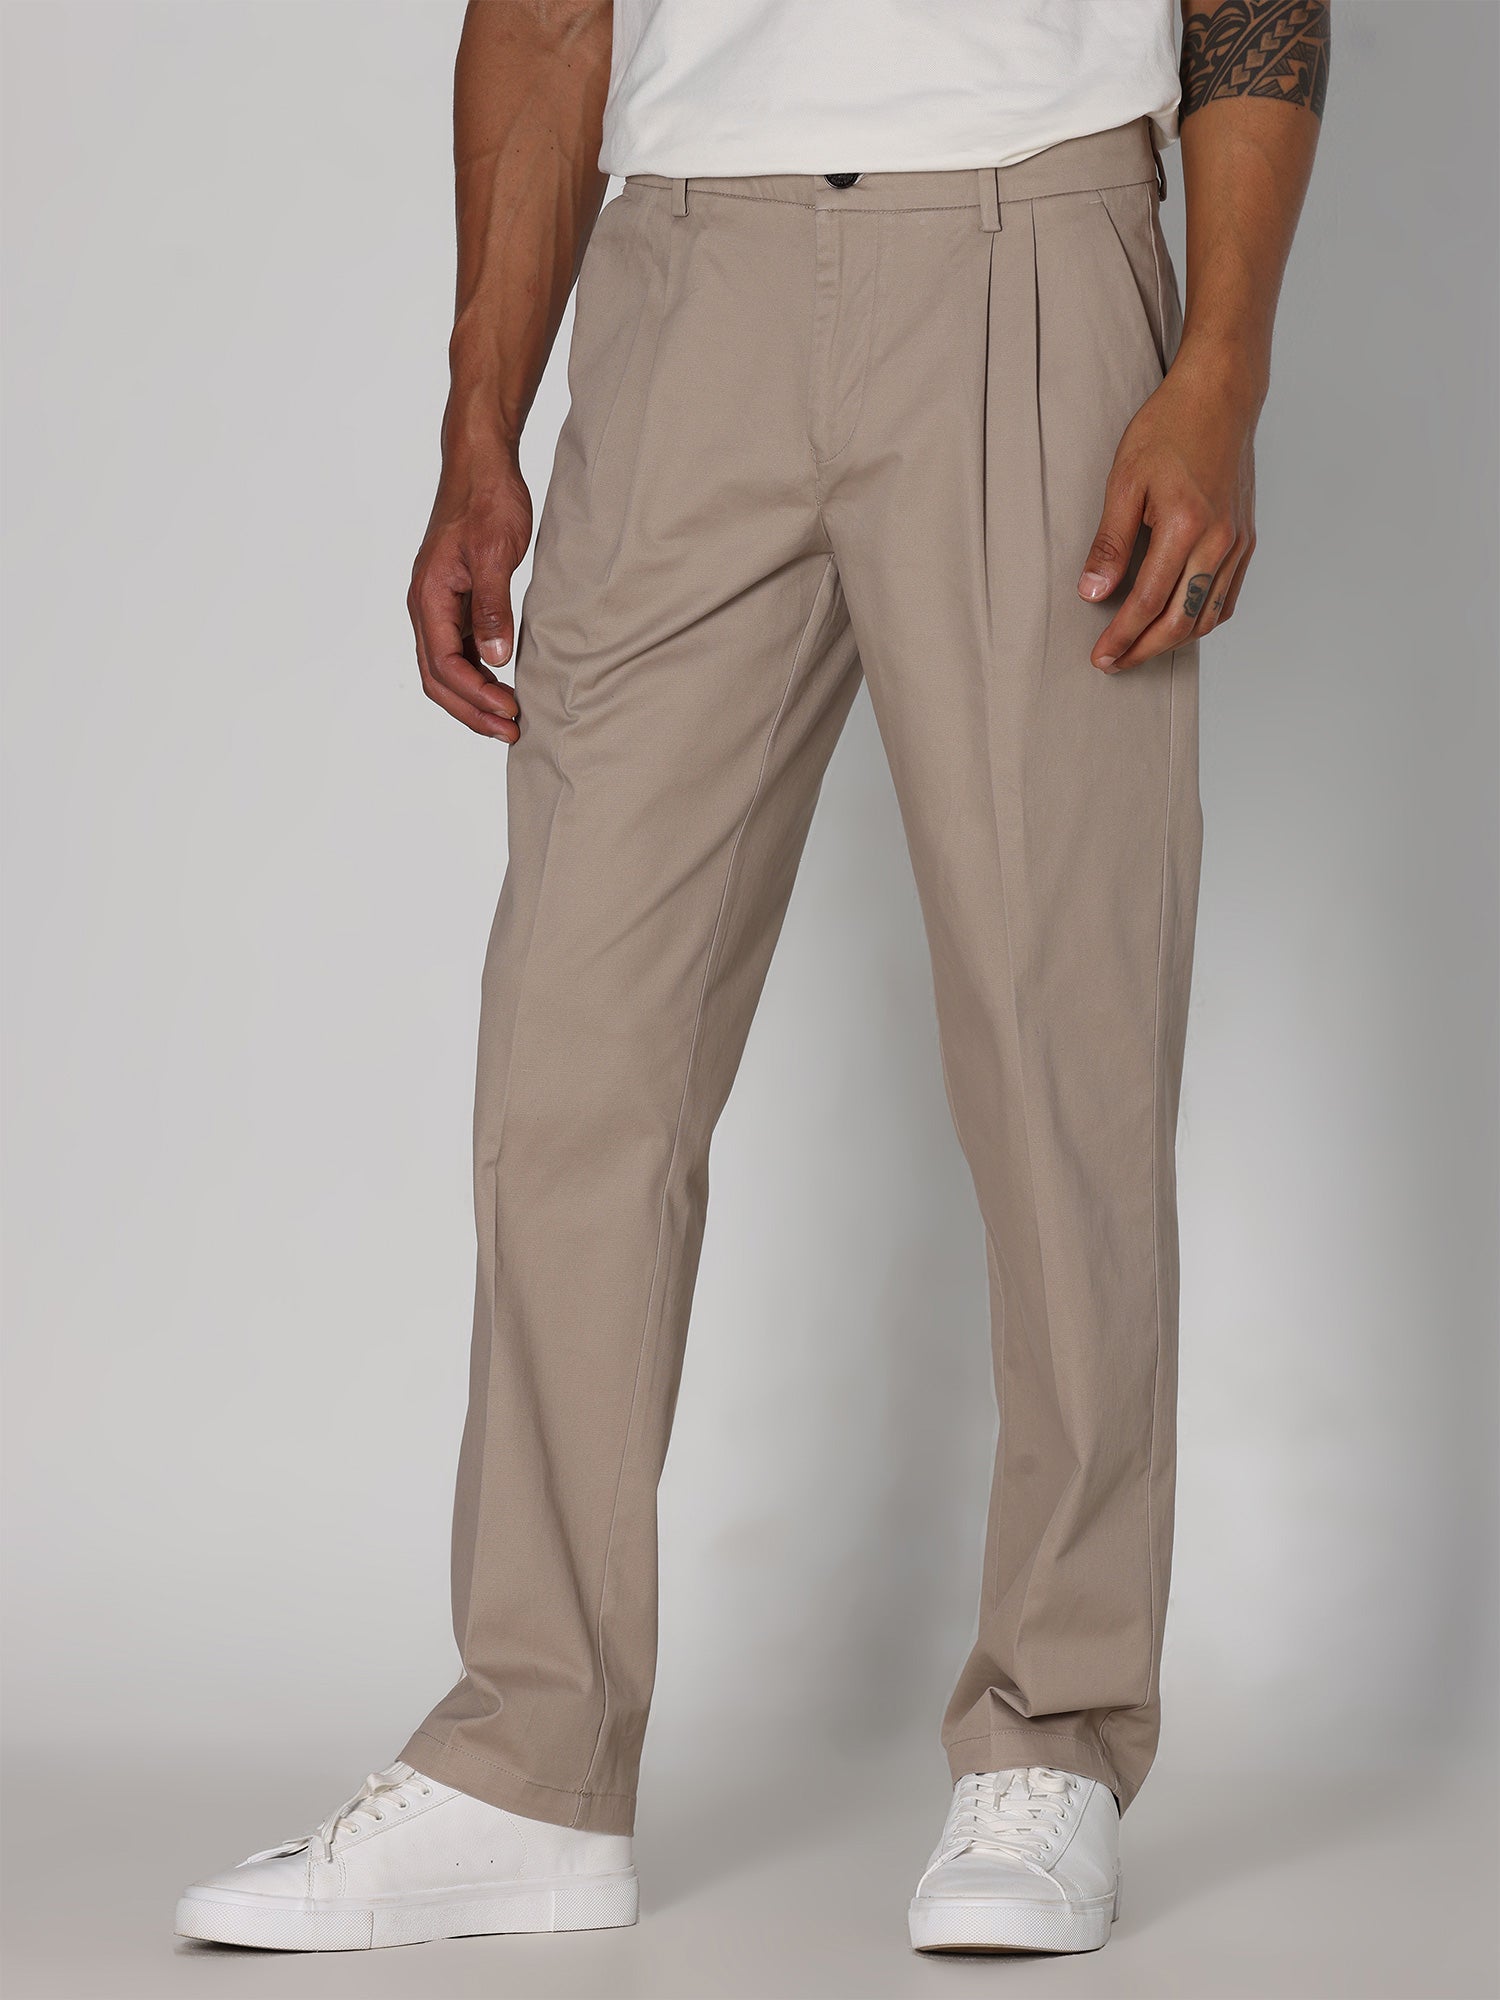 Unbranded Cargo Pants For Men Relaxed Fit Stretch Casual Loose India | Ubuy